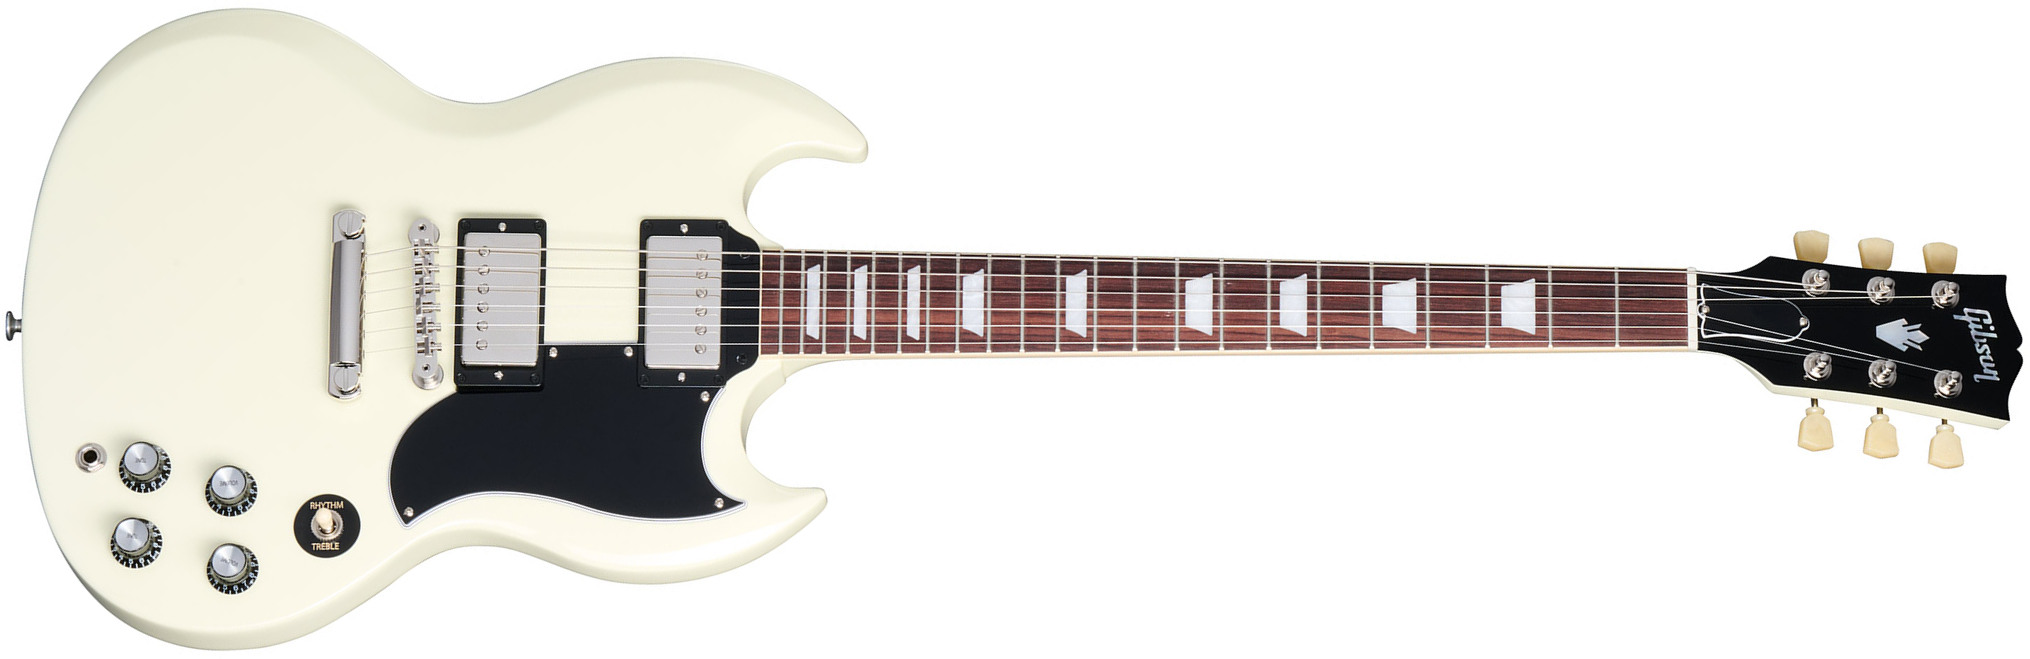 Gibson Sg Standard 1961 Custom Color 2h Ht Rw - Classic White - Double cut electric guitar - Main picture